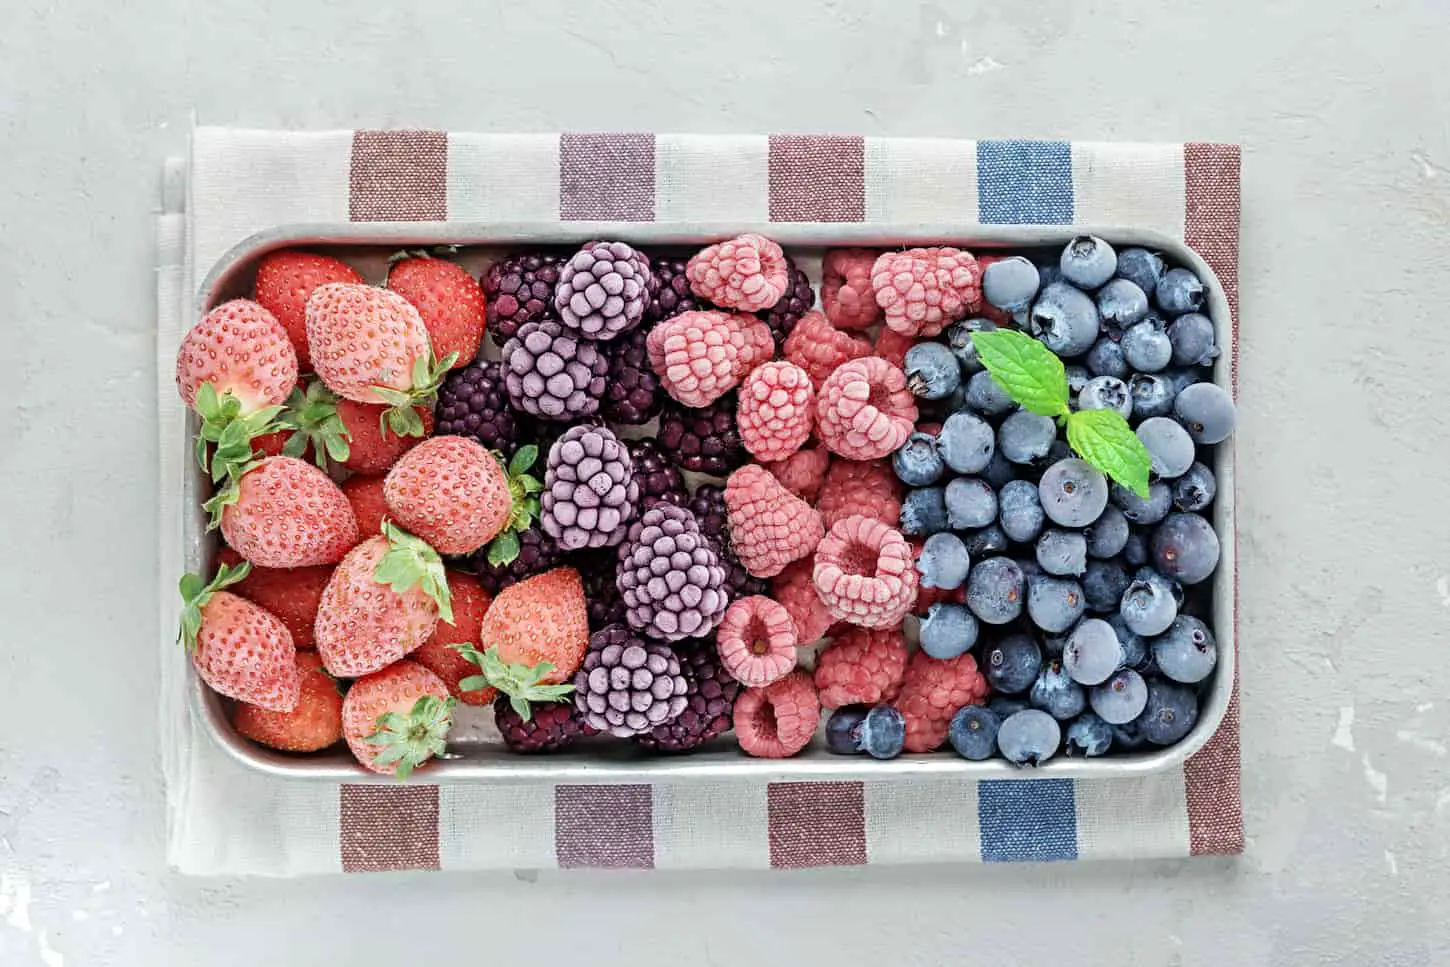 An image of Frozen berries in a metal tray on grey concrete.